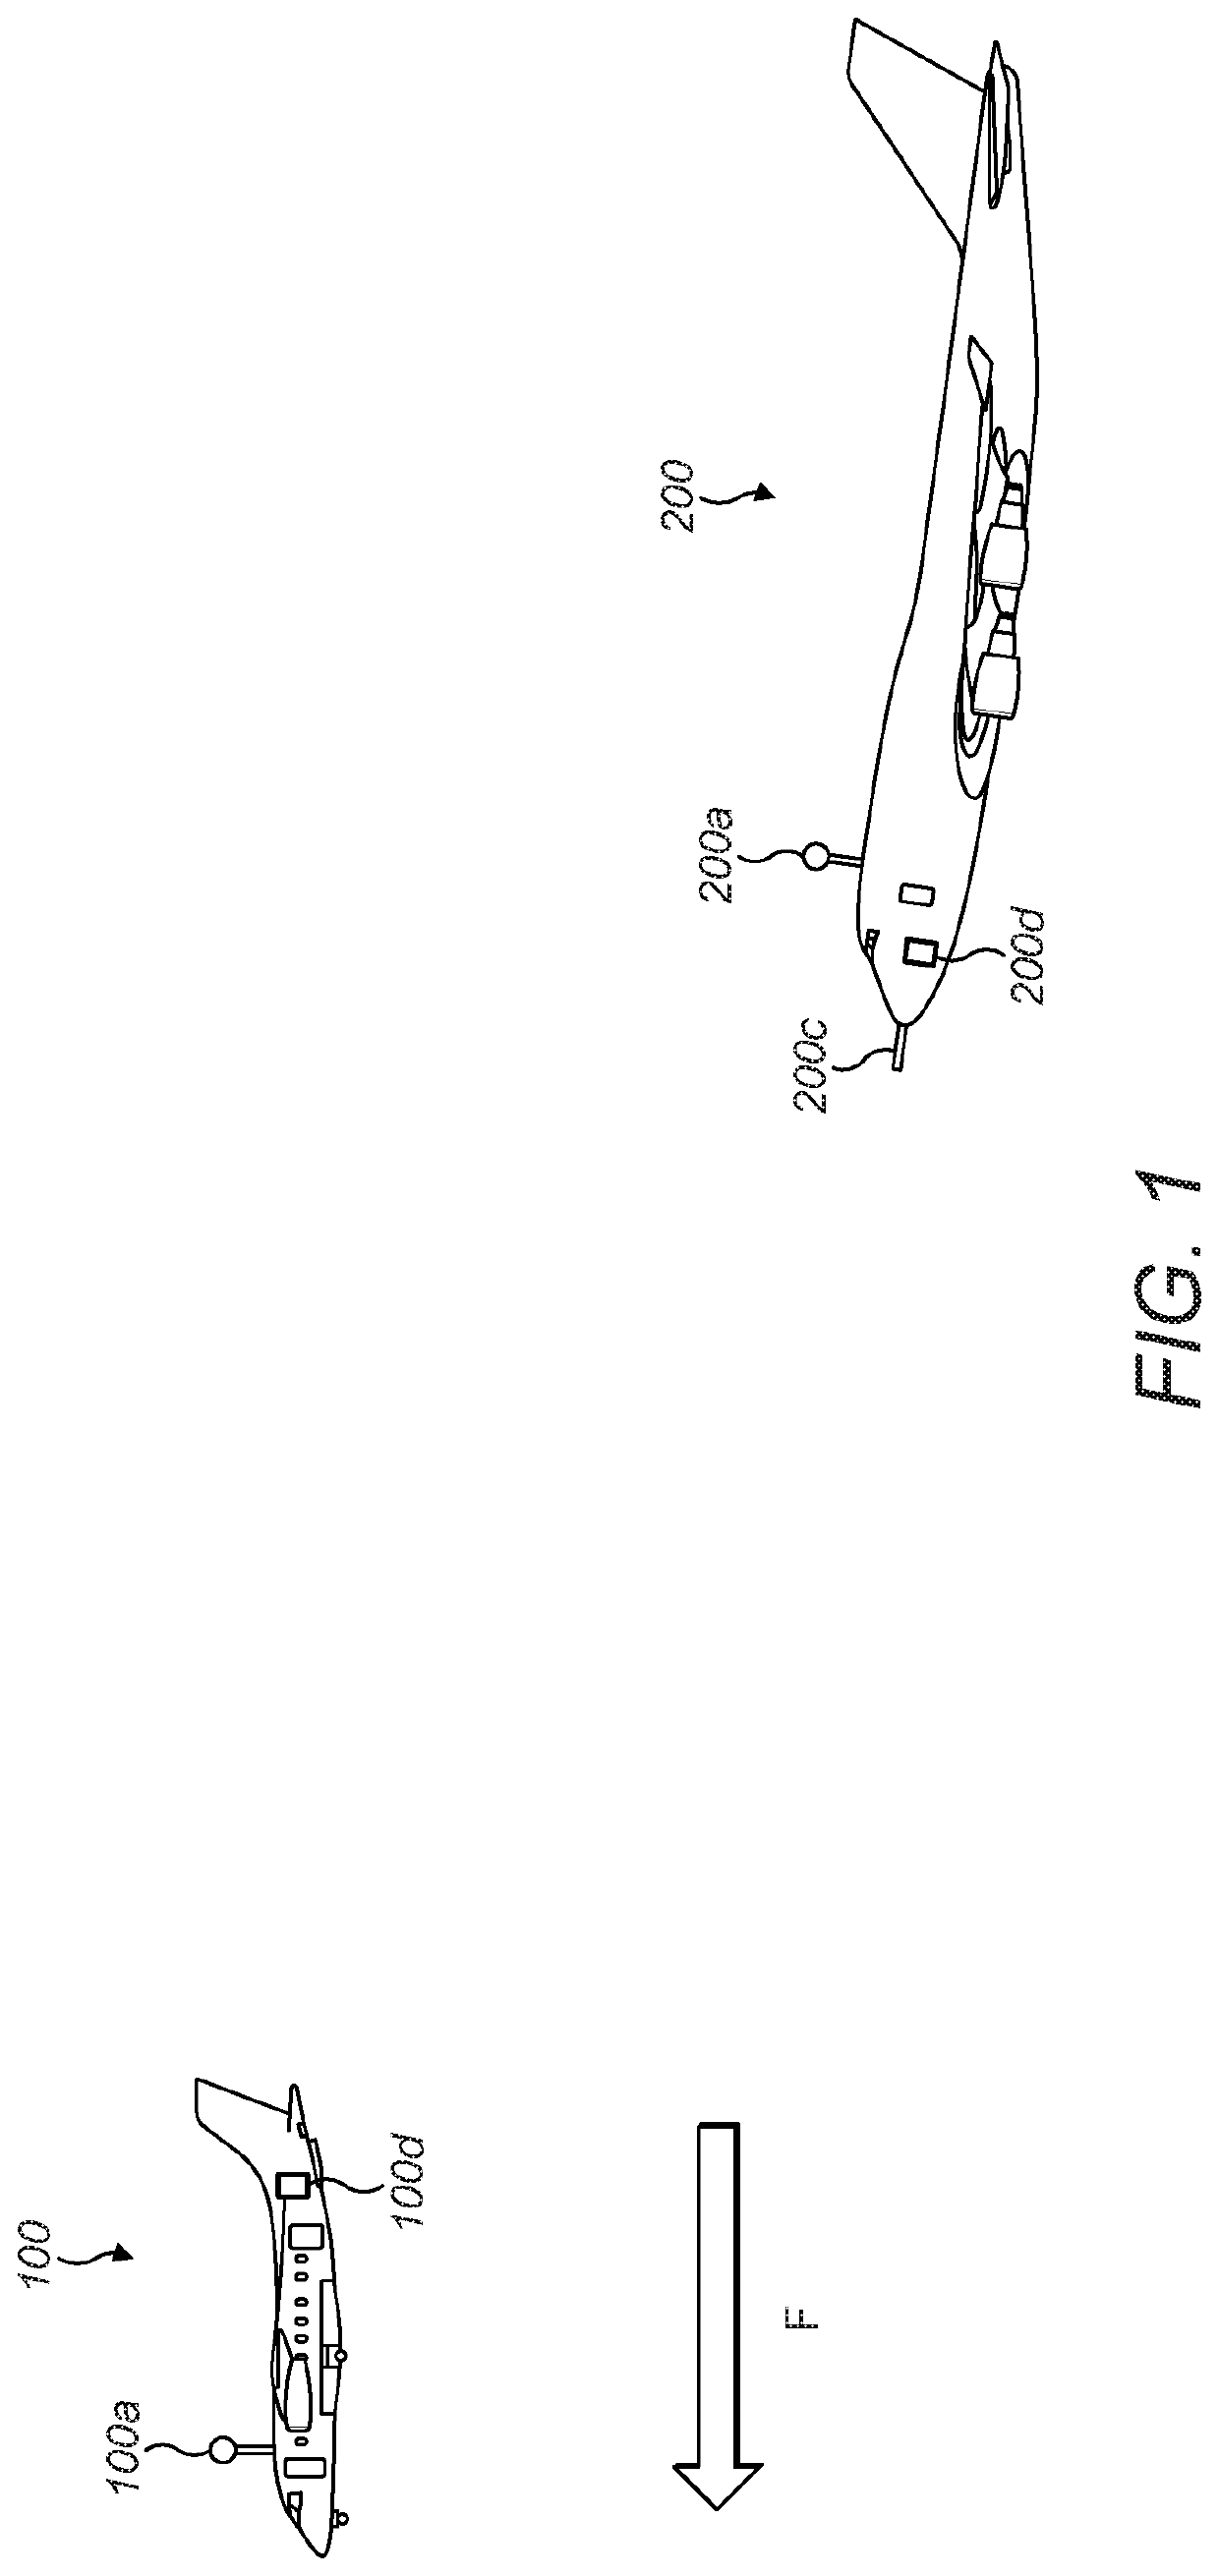 Methods and systems for in-flight fuelling of aircraft